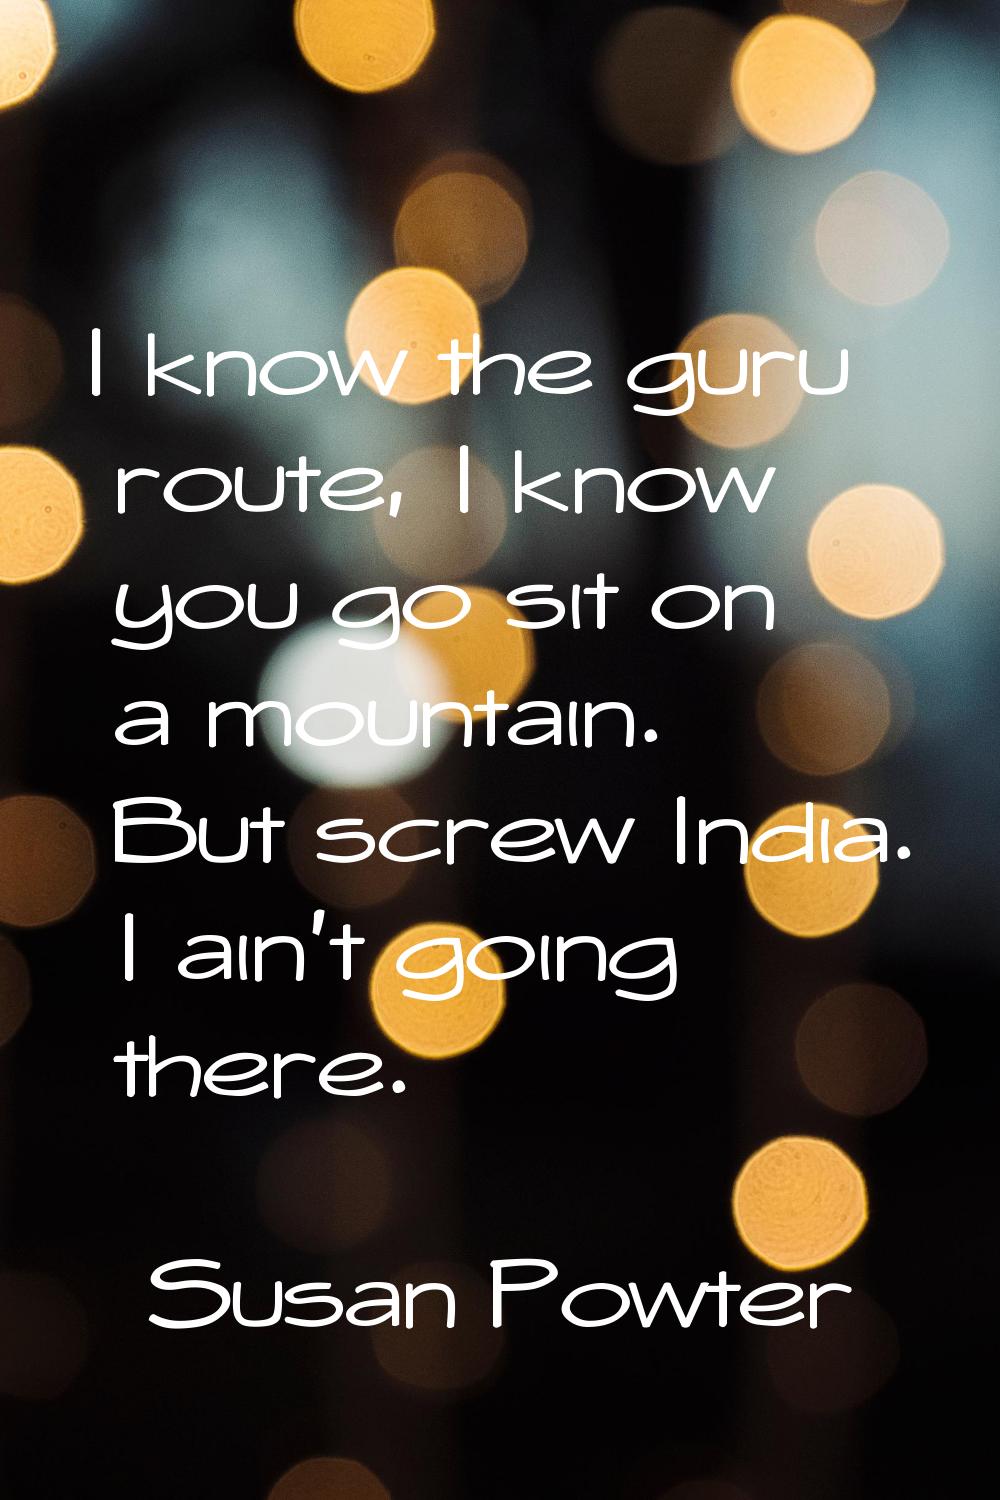 I know the guru route, I know you go sit on a mountain. But screw India. I ain't going there.